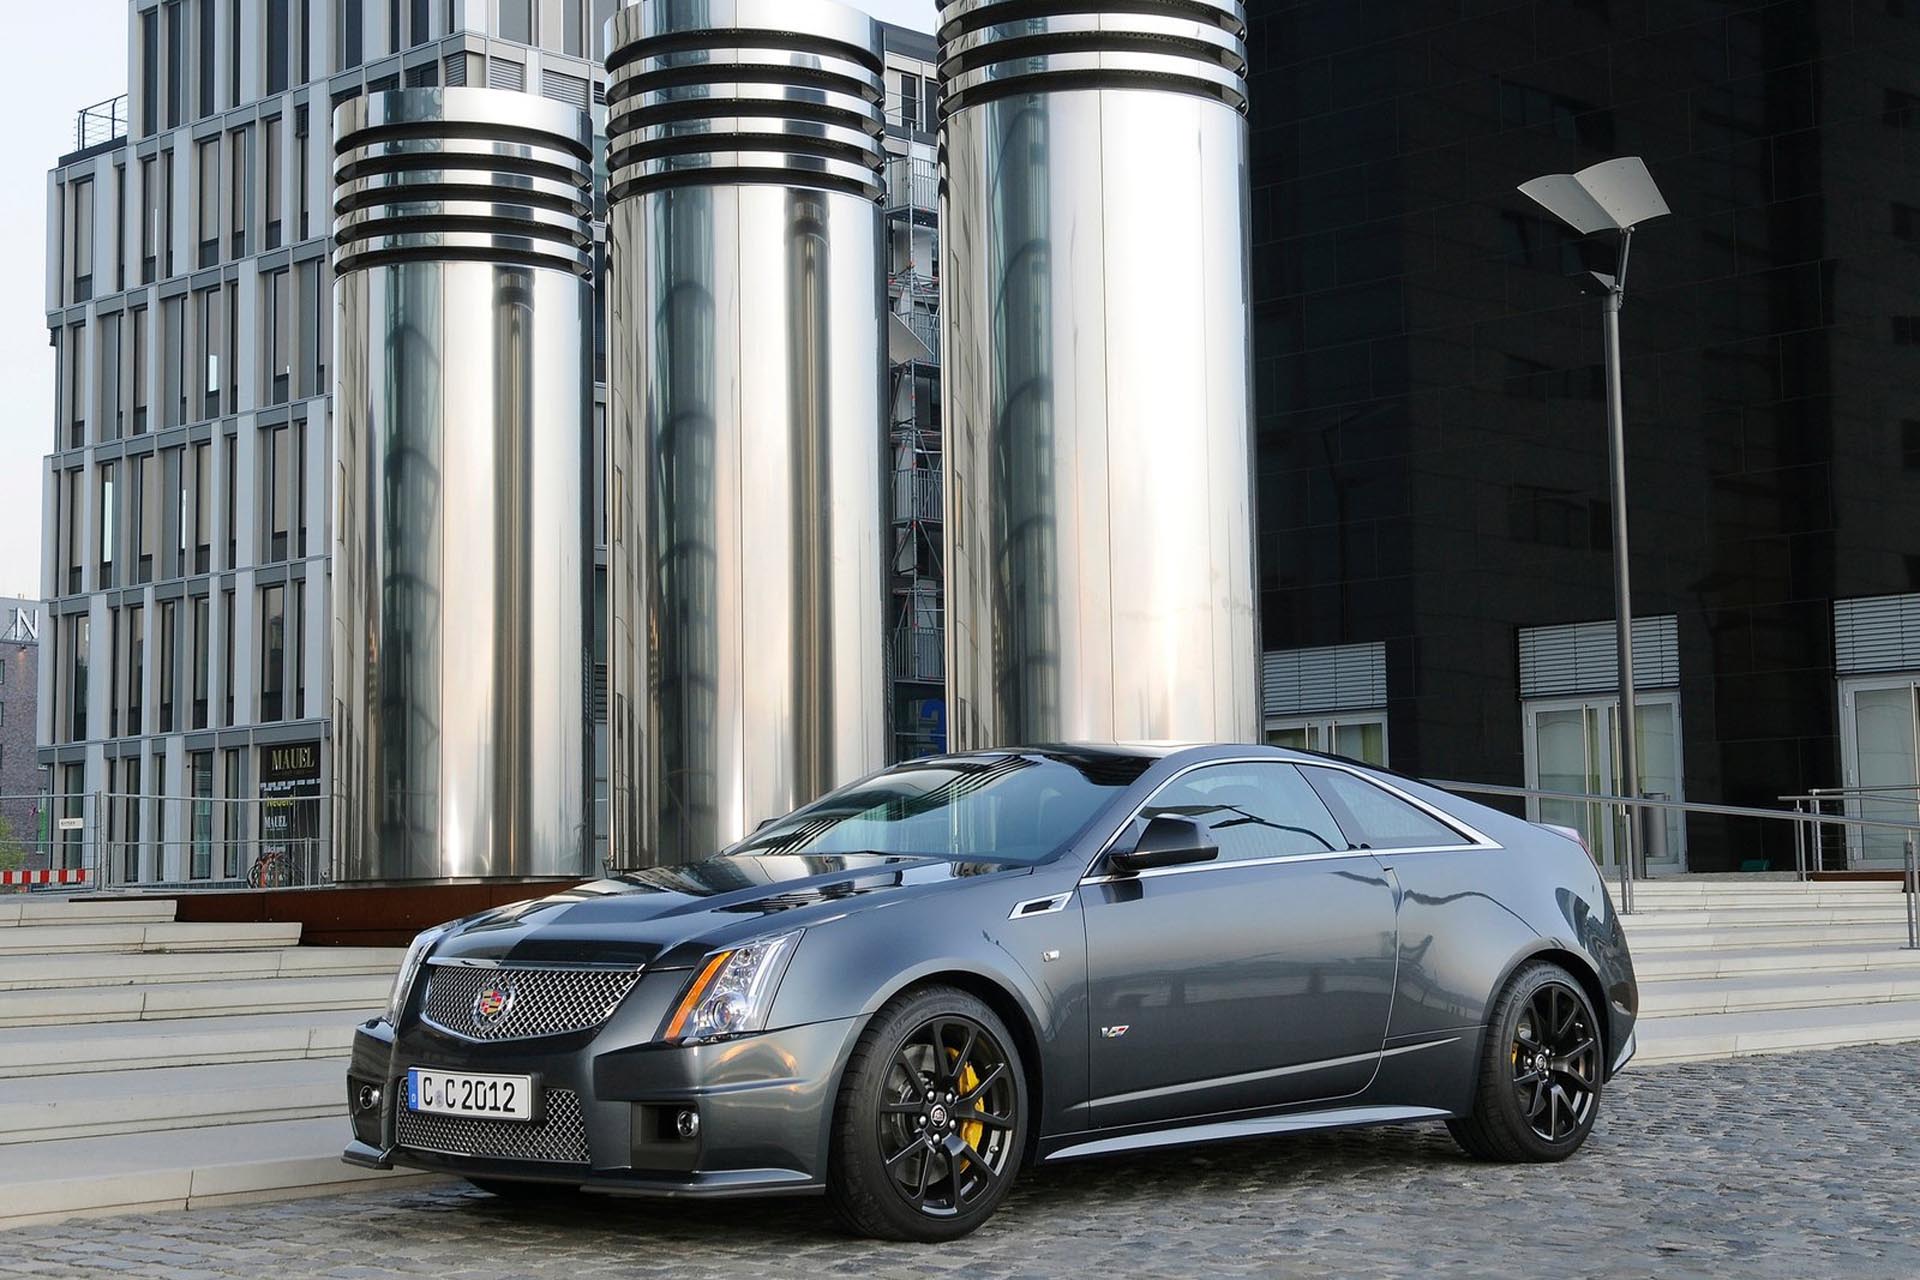 <b>Why:</b> Hear that whining, hissing sound? It’s not the wife getting riled up that you didn’t load the dishwasher to code: it’s an Eaton supercharger the size of a toaster oven stuffing an LSA V8 full of gasoline and boost. Partly, that’s how CTS-V makes a whopping 556 horsepower, which can put the rear tires up in smoke on command if desired, or, launch you from 0 to 100 km/h faster than she can say “not tonight honey.” 